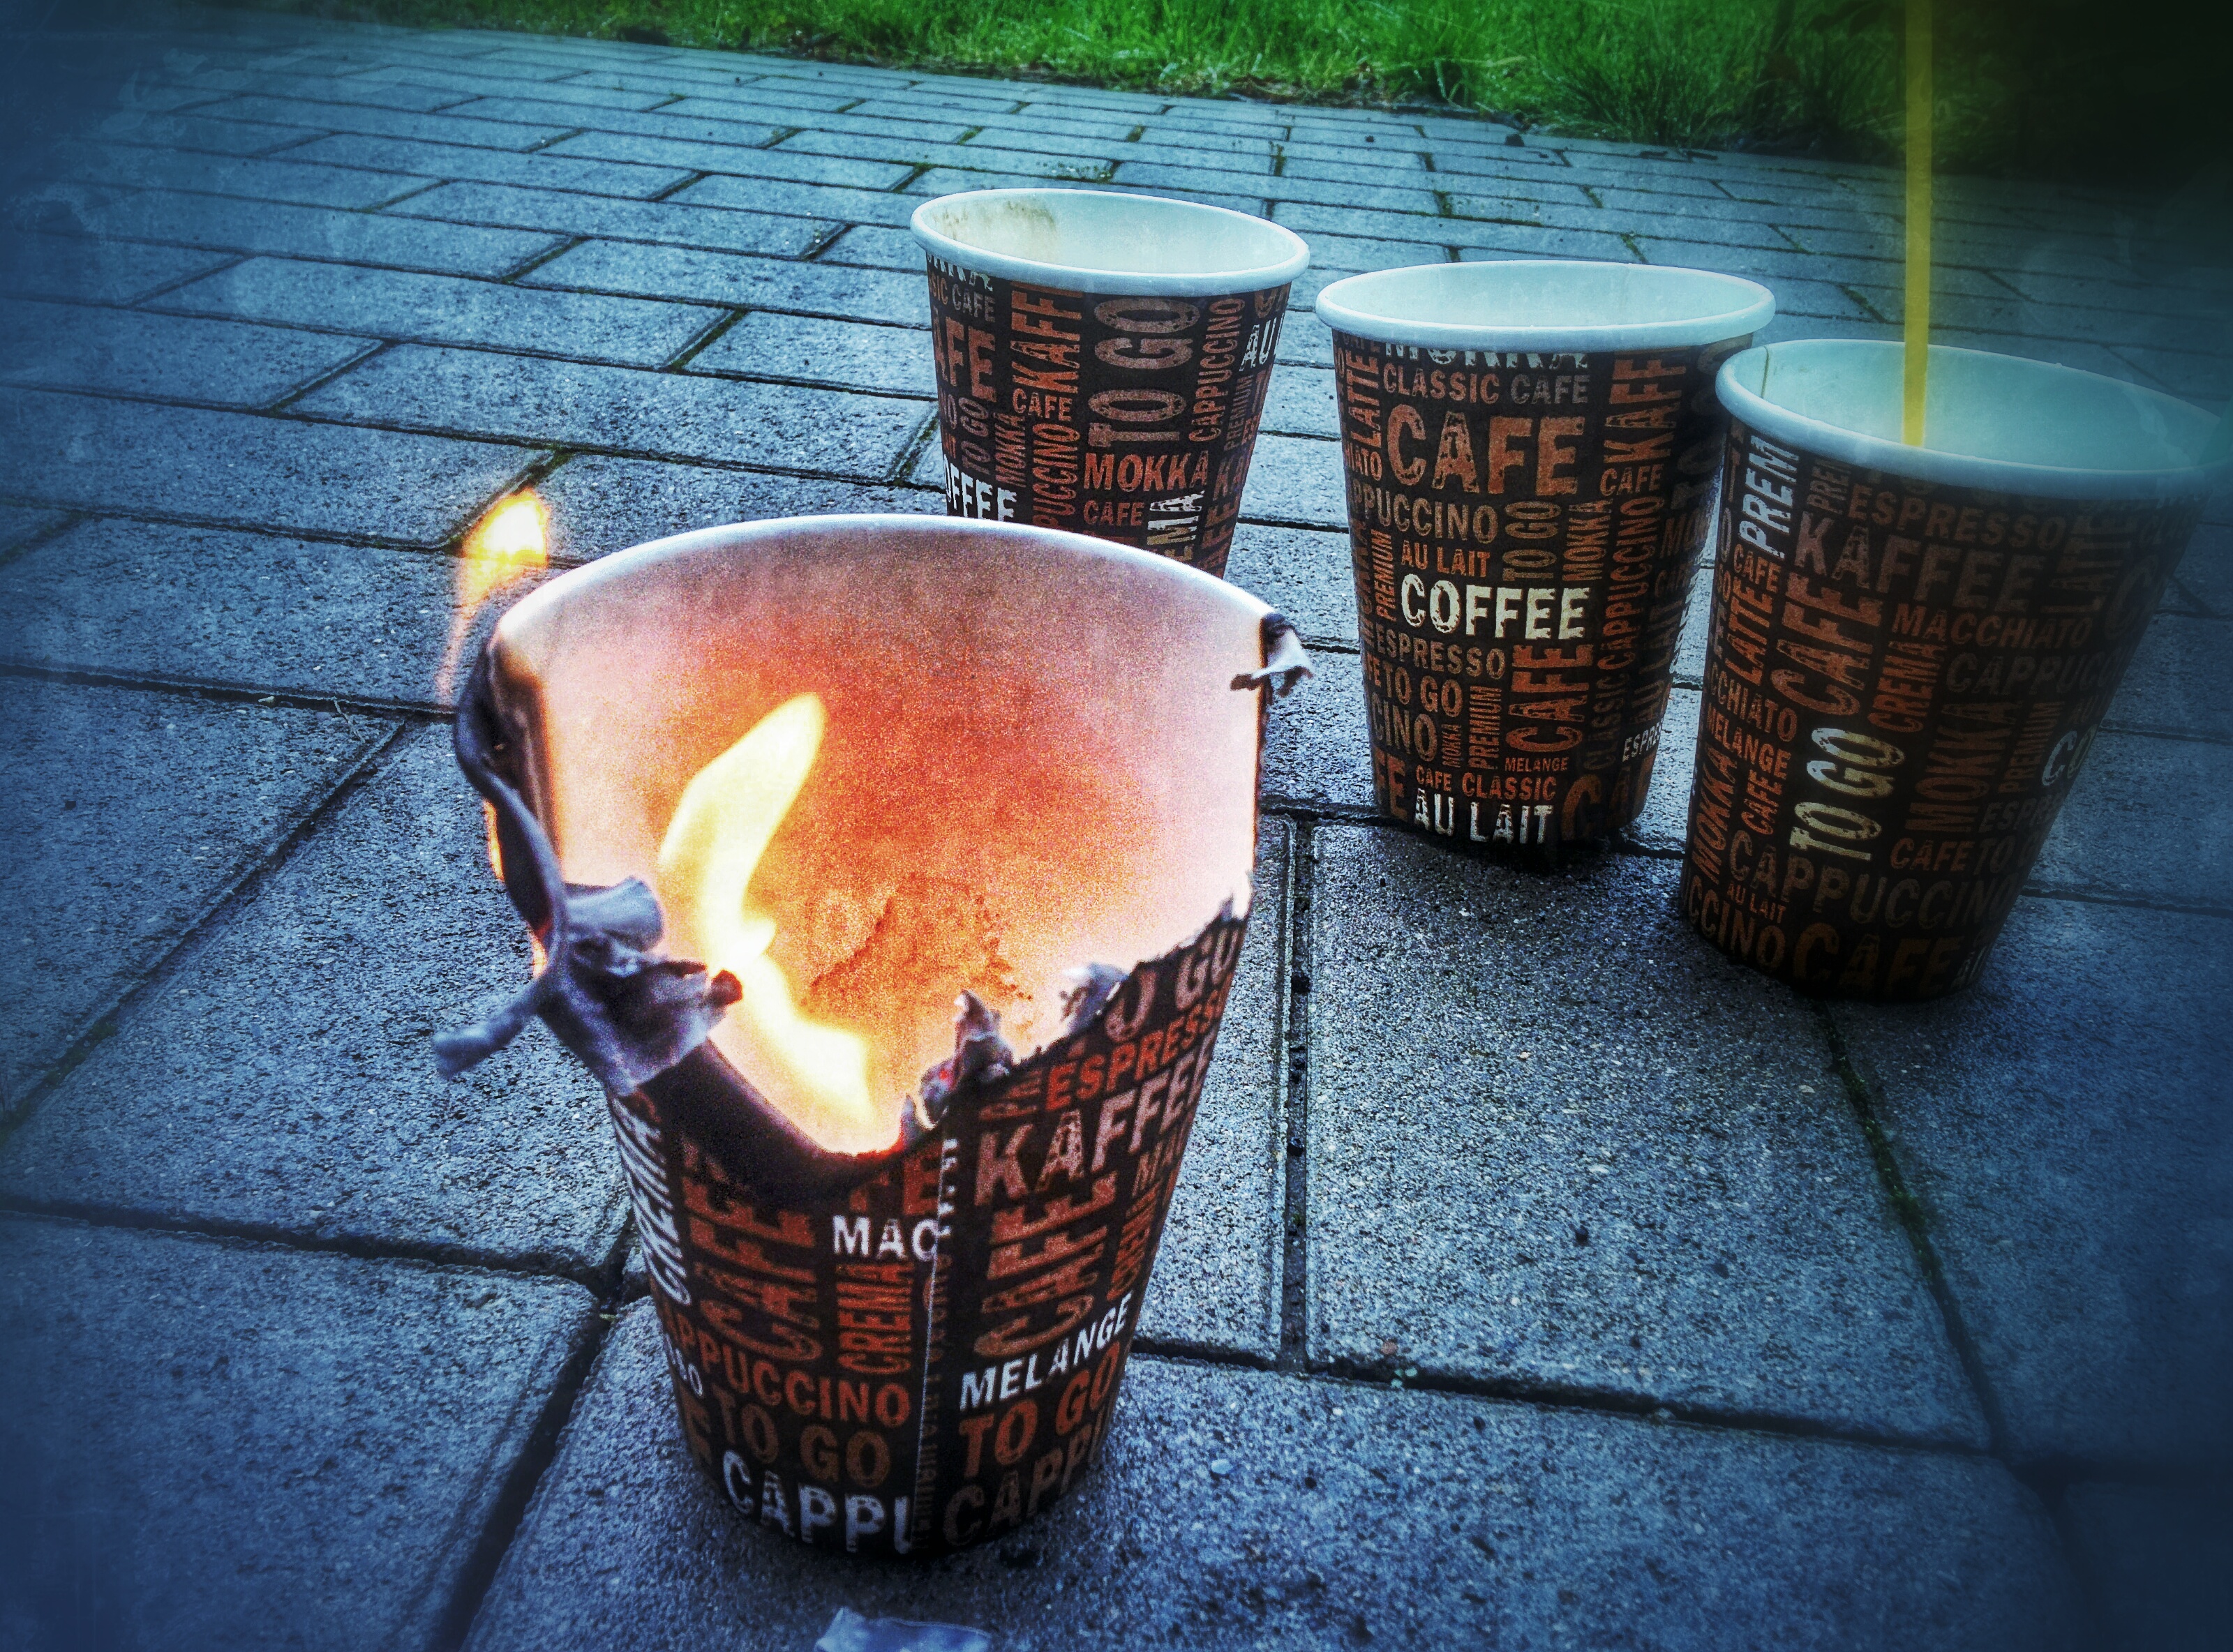 Image of 4 paper coffee mugs standing on paving bricks. One of them is separated from the others and on fire.